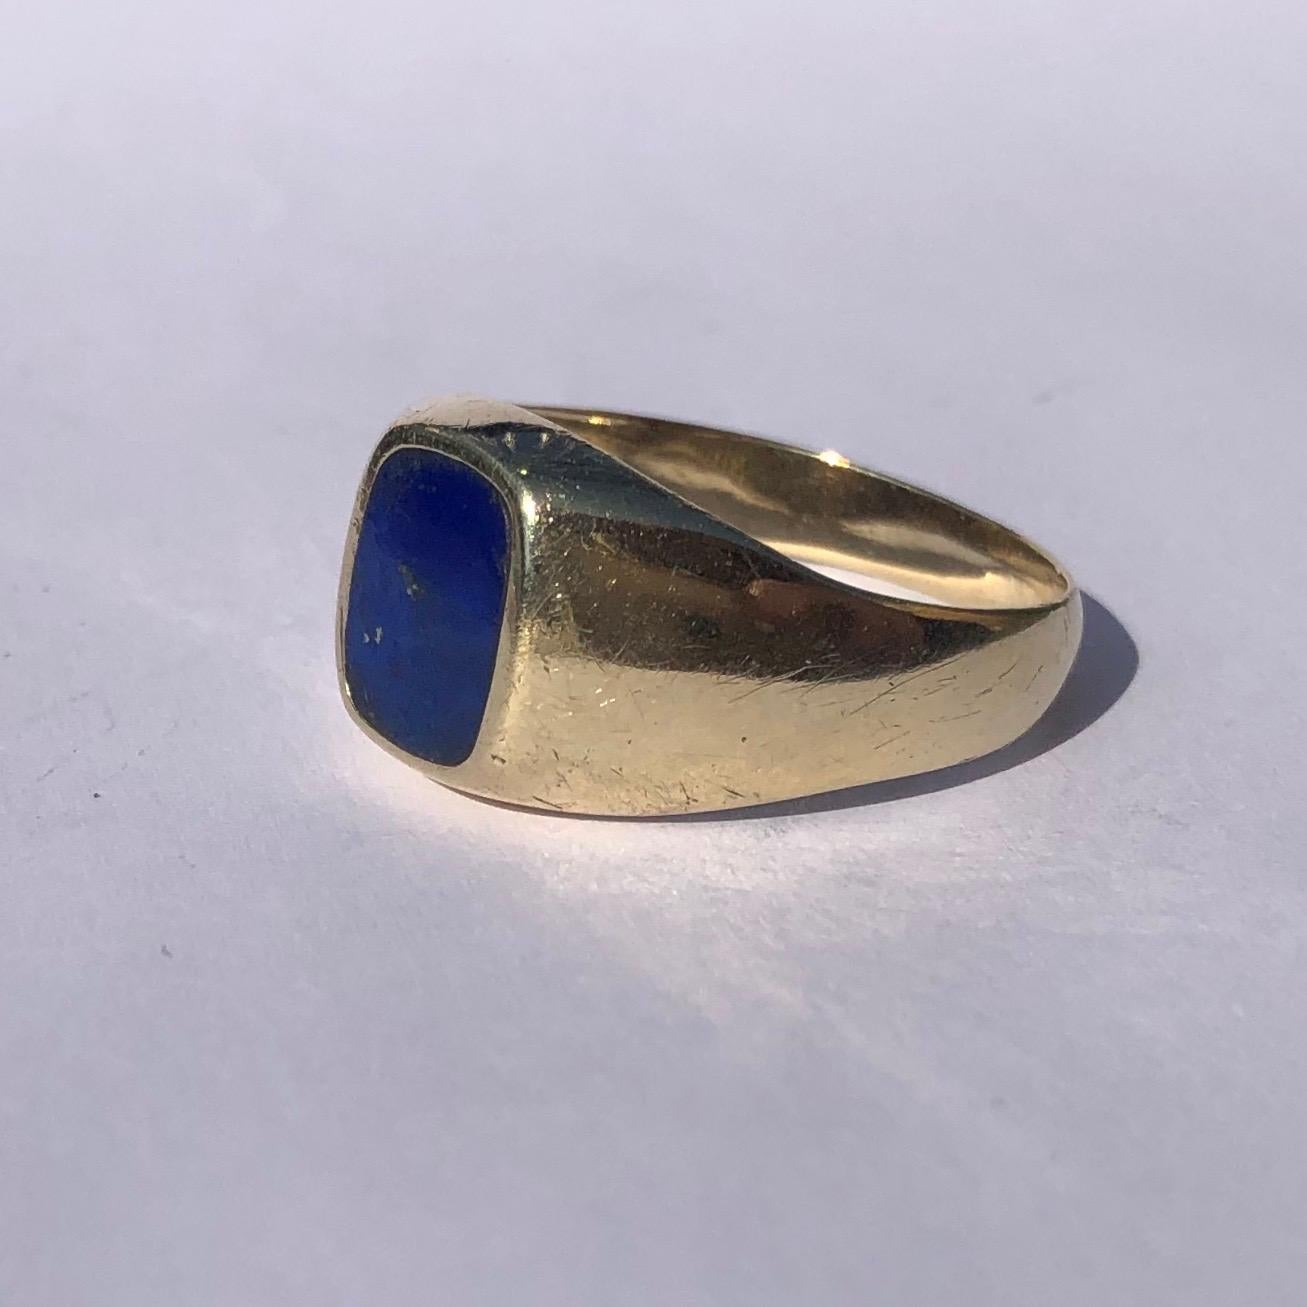 The lapis stone in this ring is beautiful, bright and glossy. The smooth cut of the stone goes perfectly with the chunky gold ring it is set within. Made in London, England. 

Ring Size: Z or 12 1/2 
Stone Dimensions: 10x8mm

Weight: 6g